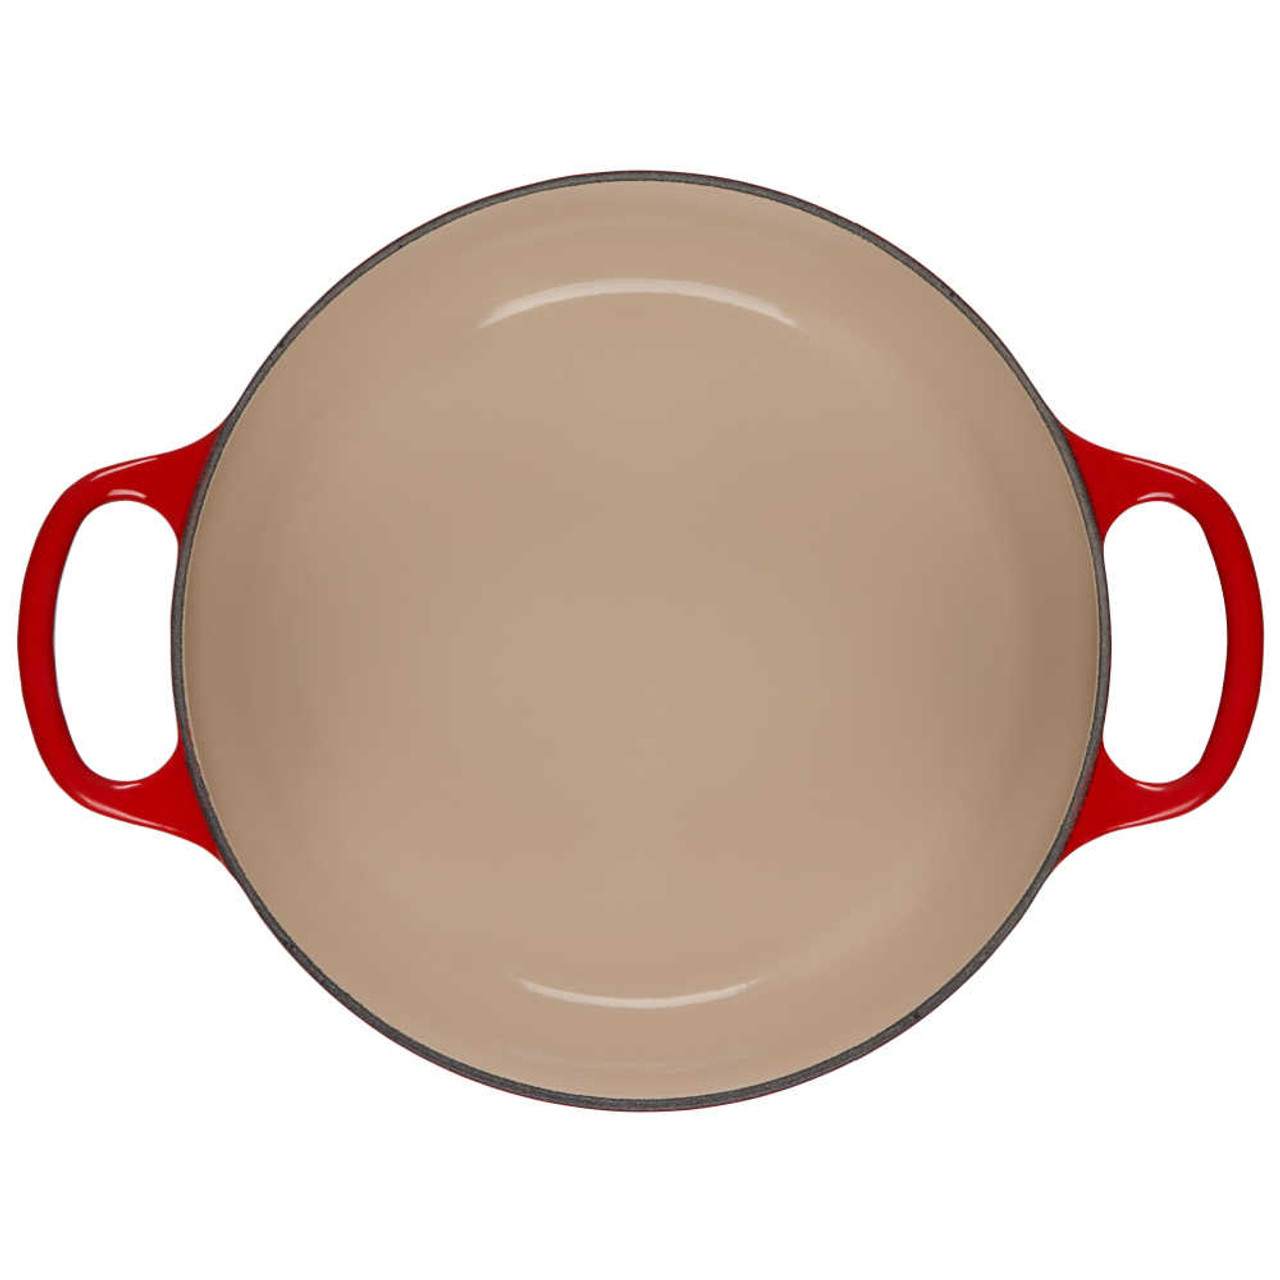 https://cdn11.bigcommerce.com/s-hccytny0od/images/stencil/1280x1280/products/3846/17484/Le_Creuset_Round_Dutch_Oven_With_Heart_Knob_Cerise_2__41066.1639441699.jpg?c=2?imbypass=on